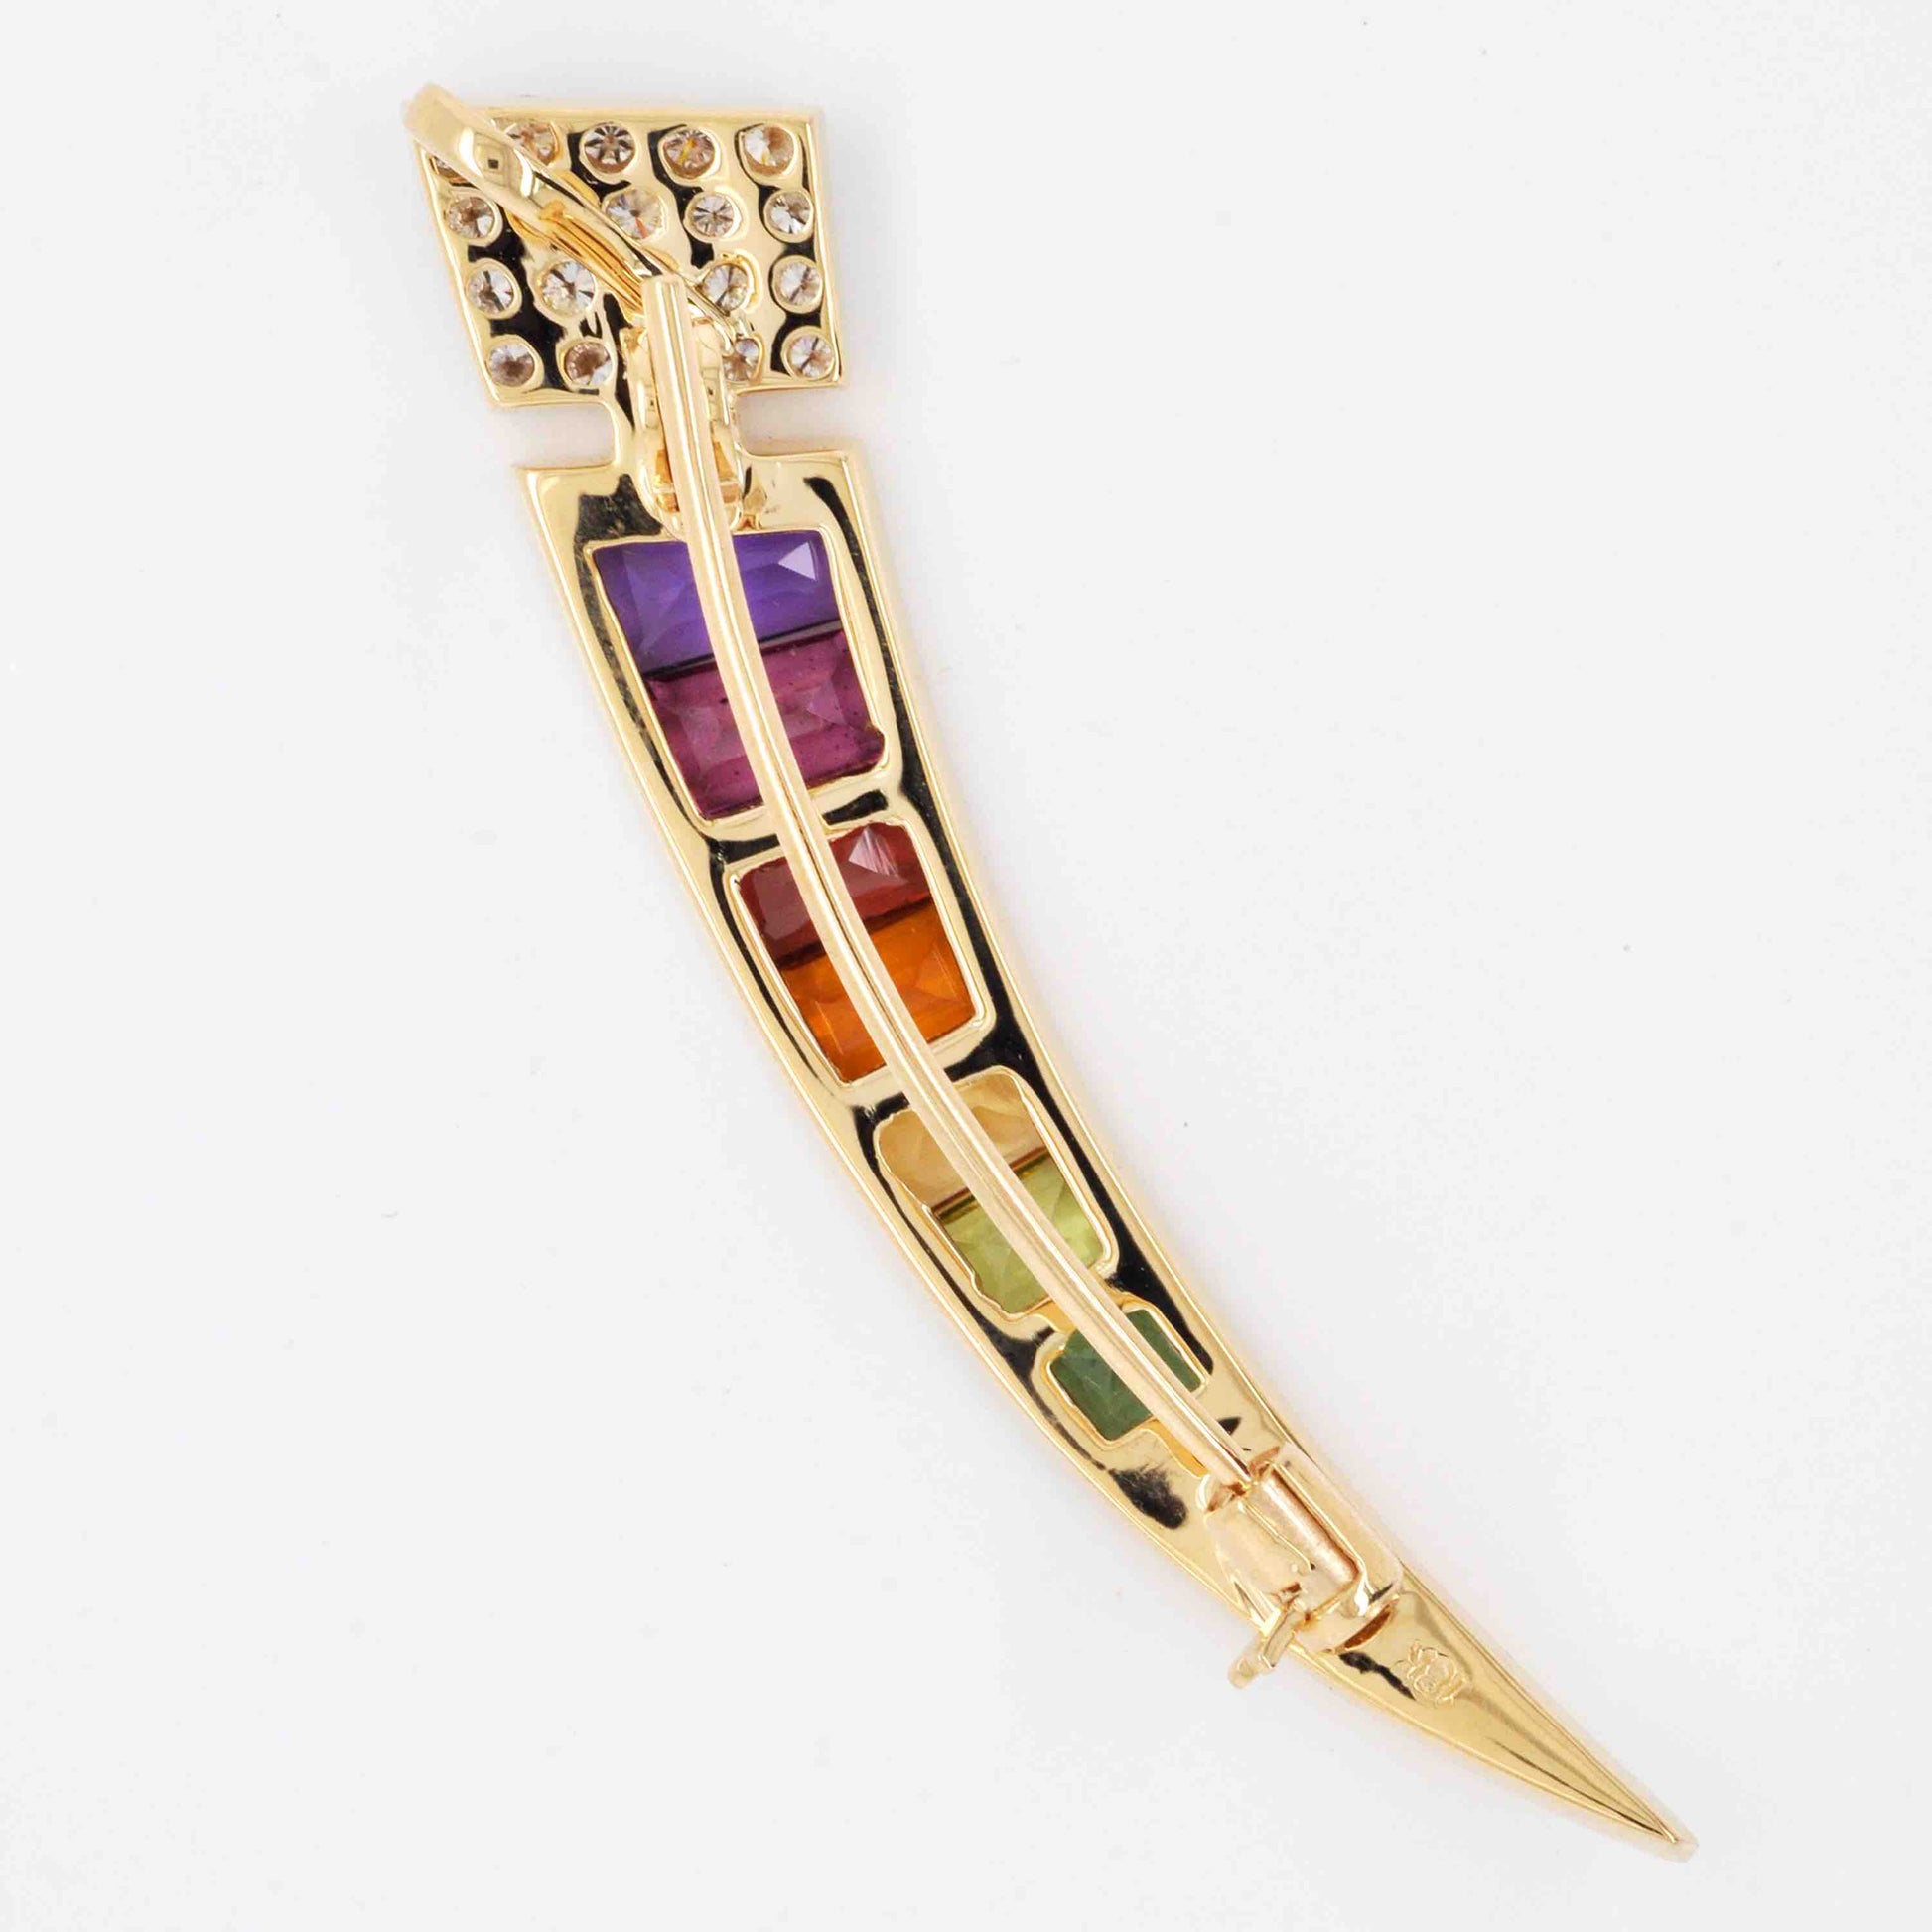 "Colorful brooch pendant with yellow gold "